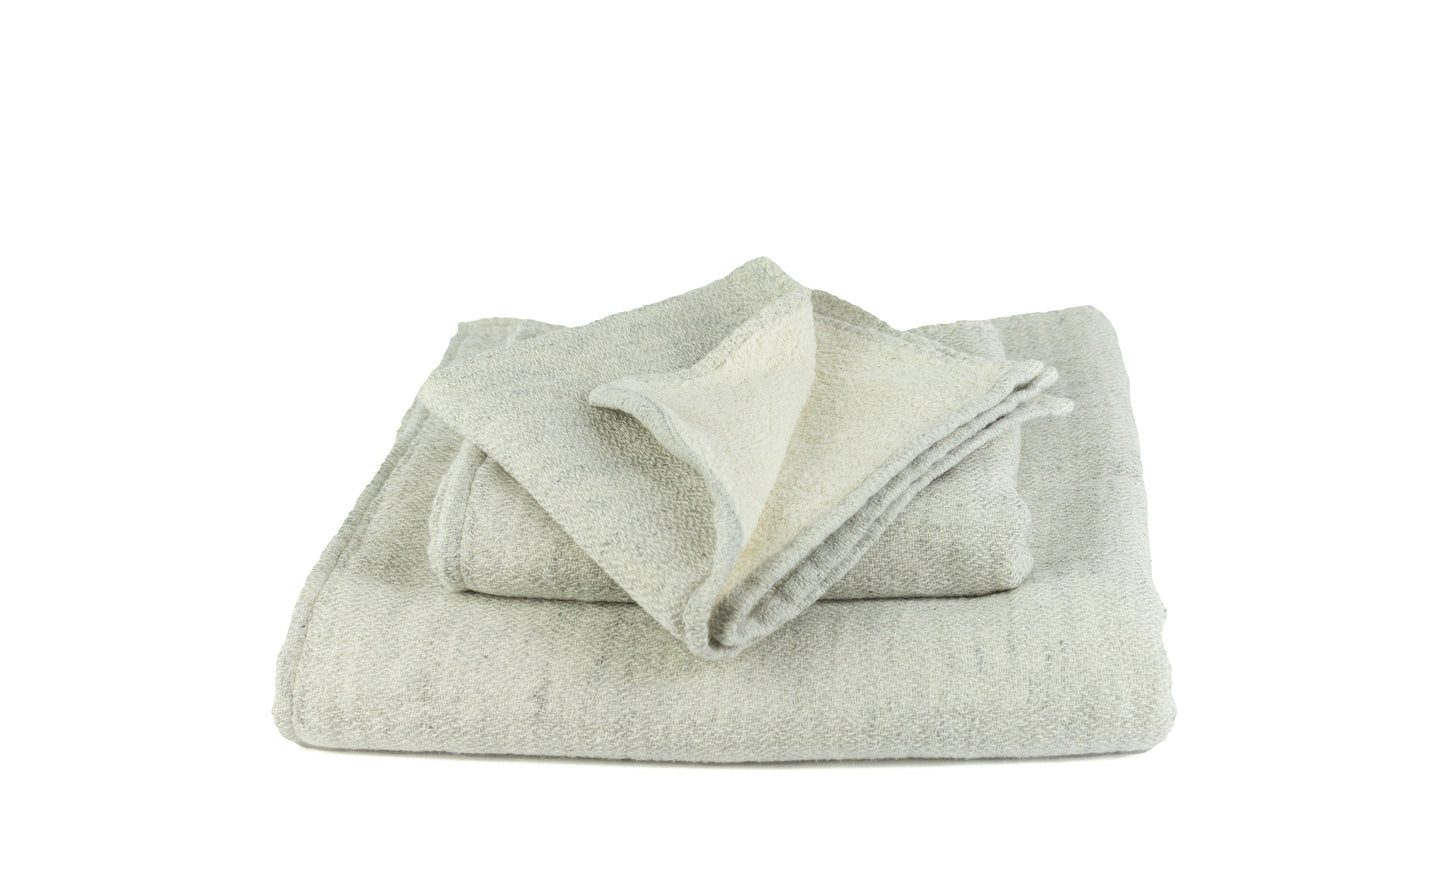 Claire light grey - Organic Cotton Terry Towel